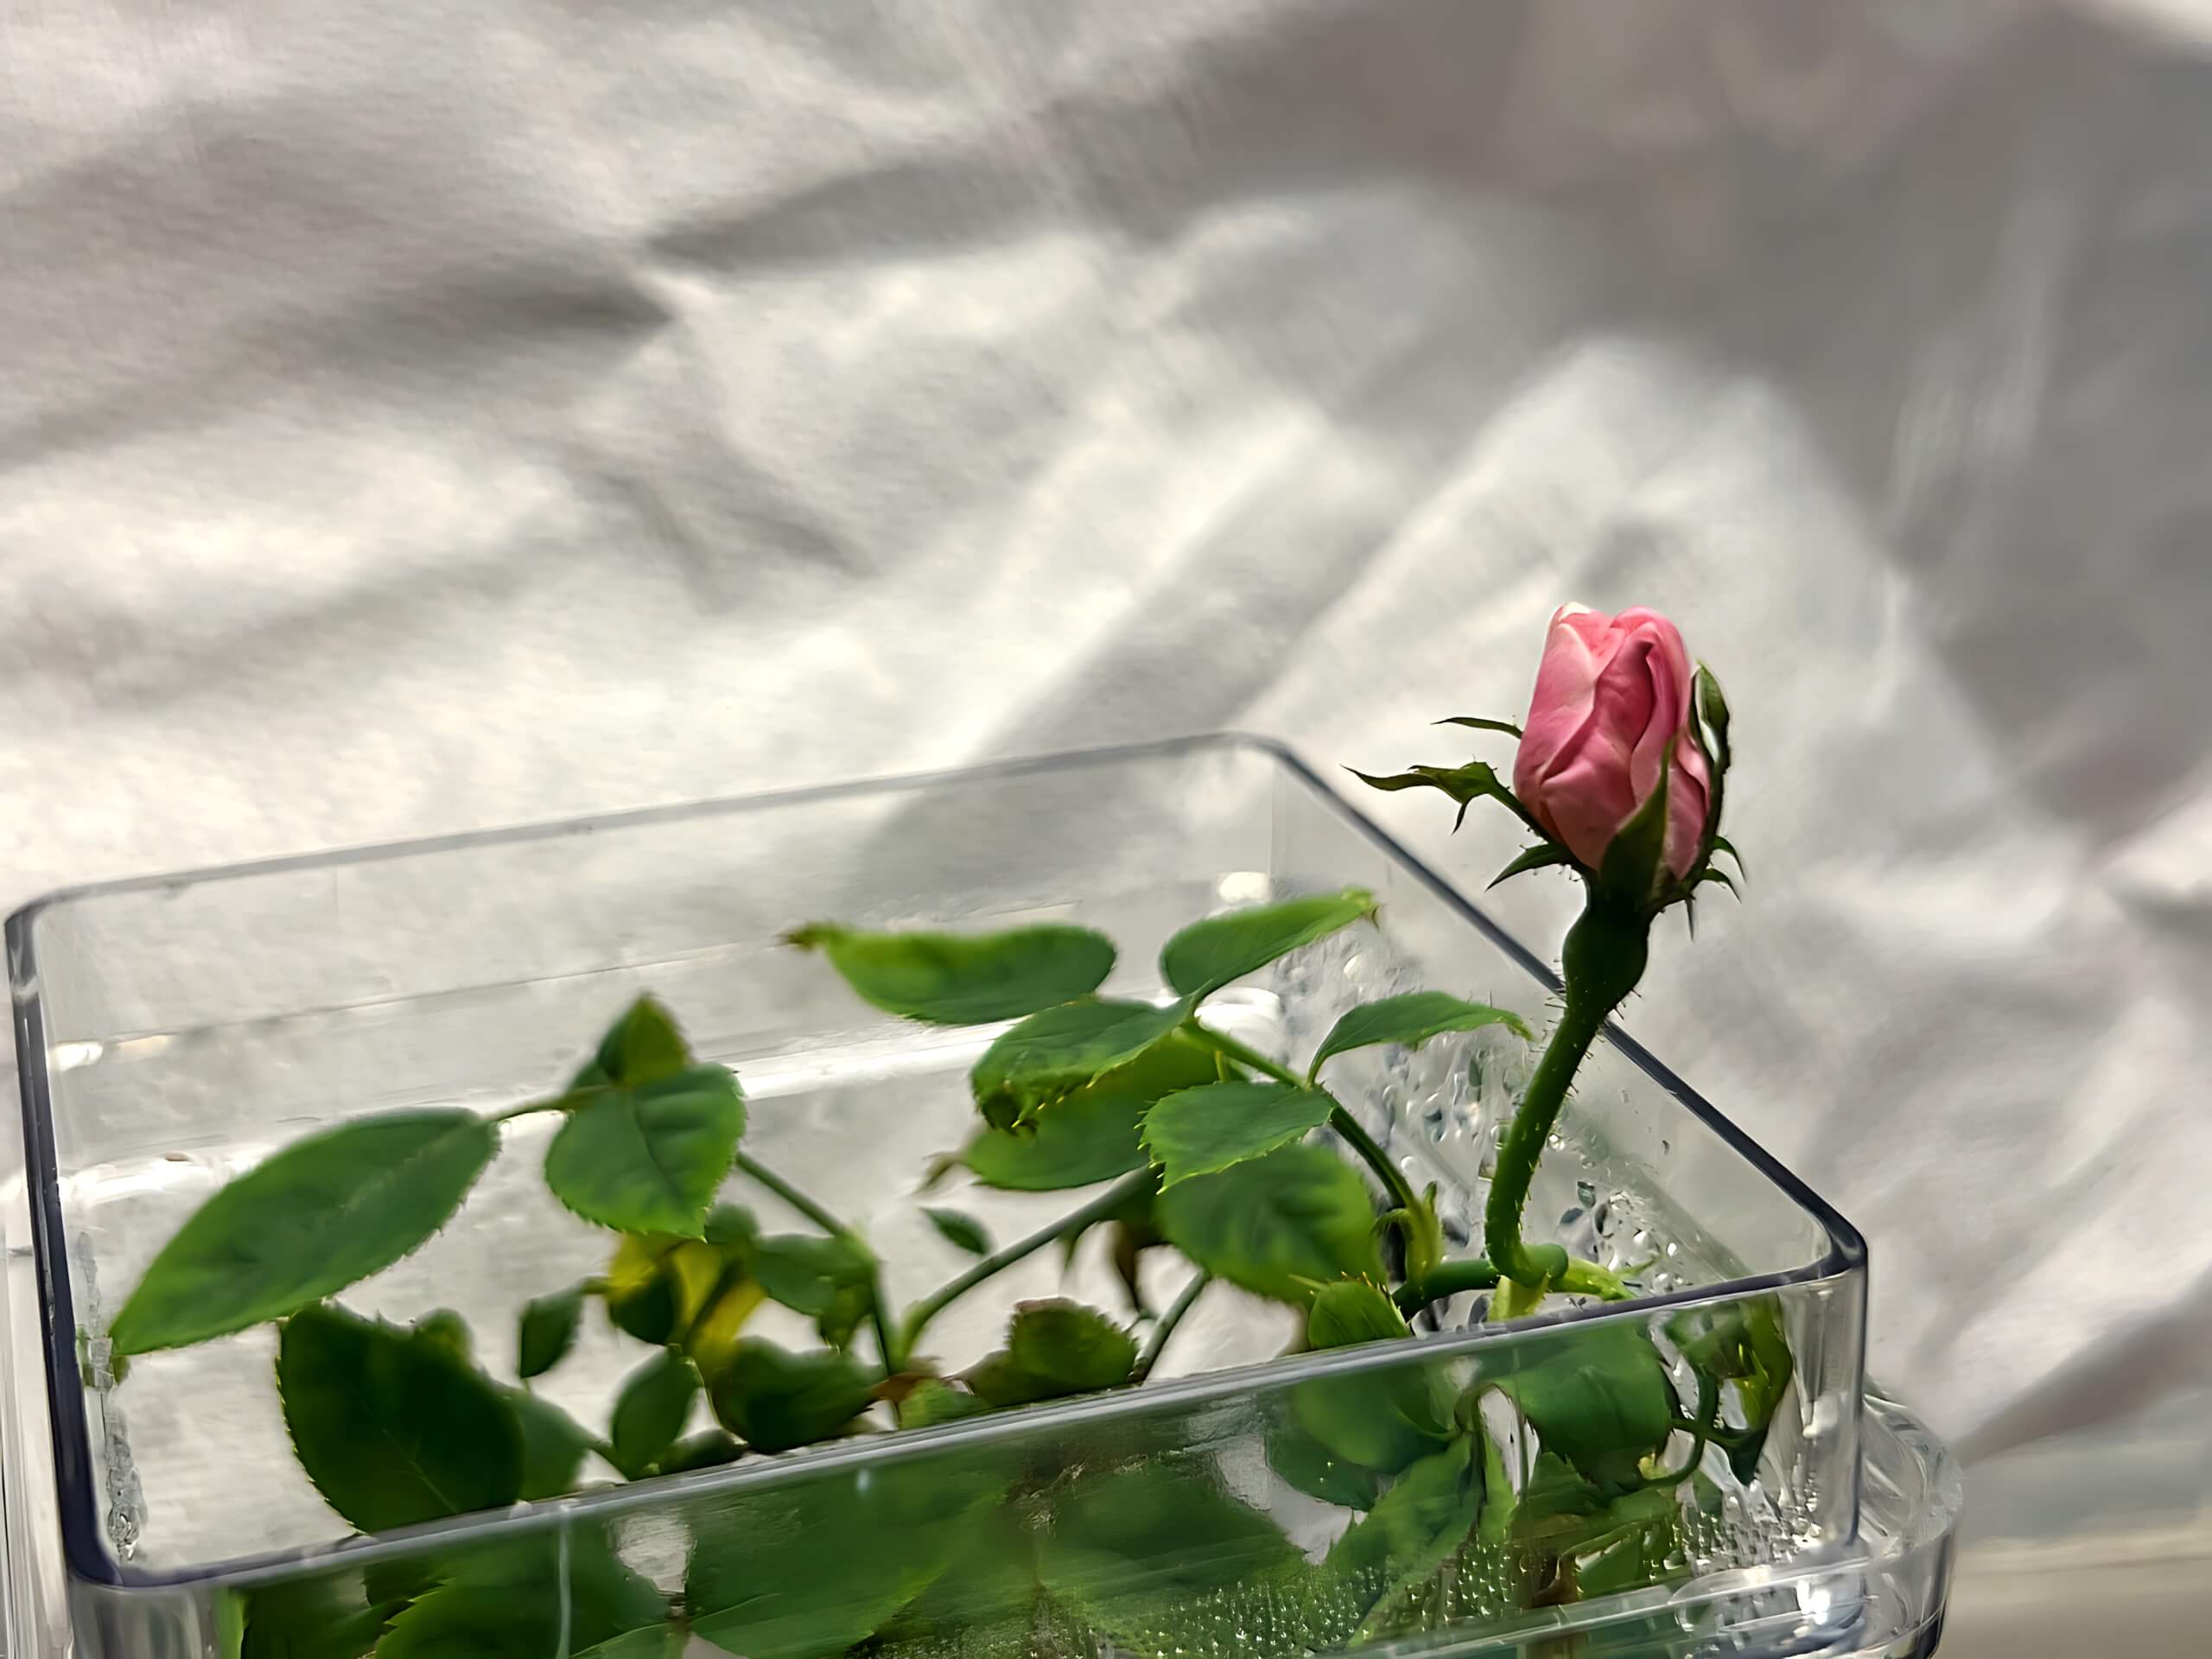 A tiny rose plant with a pink bloom grows in a small, clear plastic box.